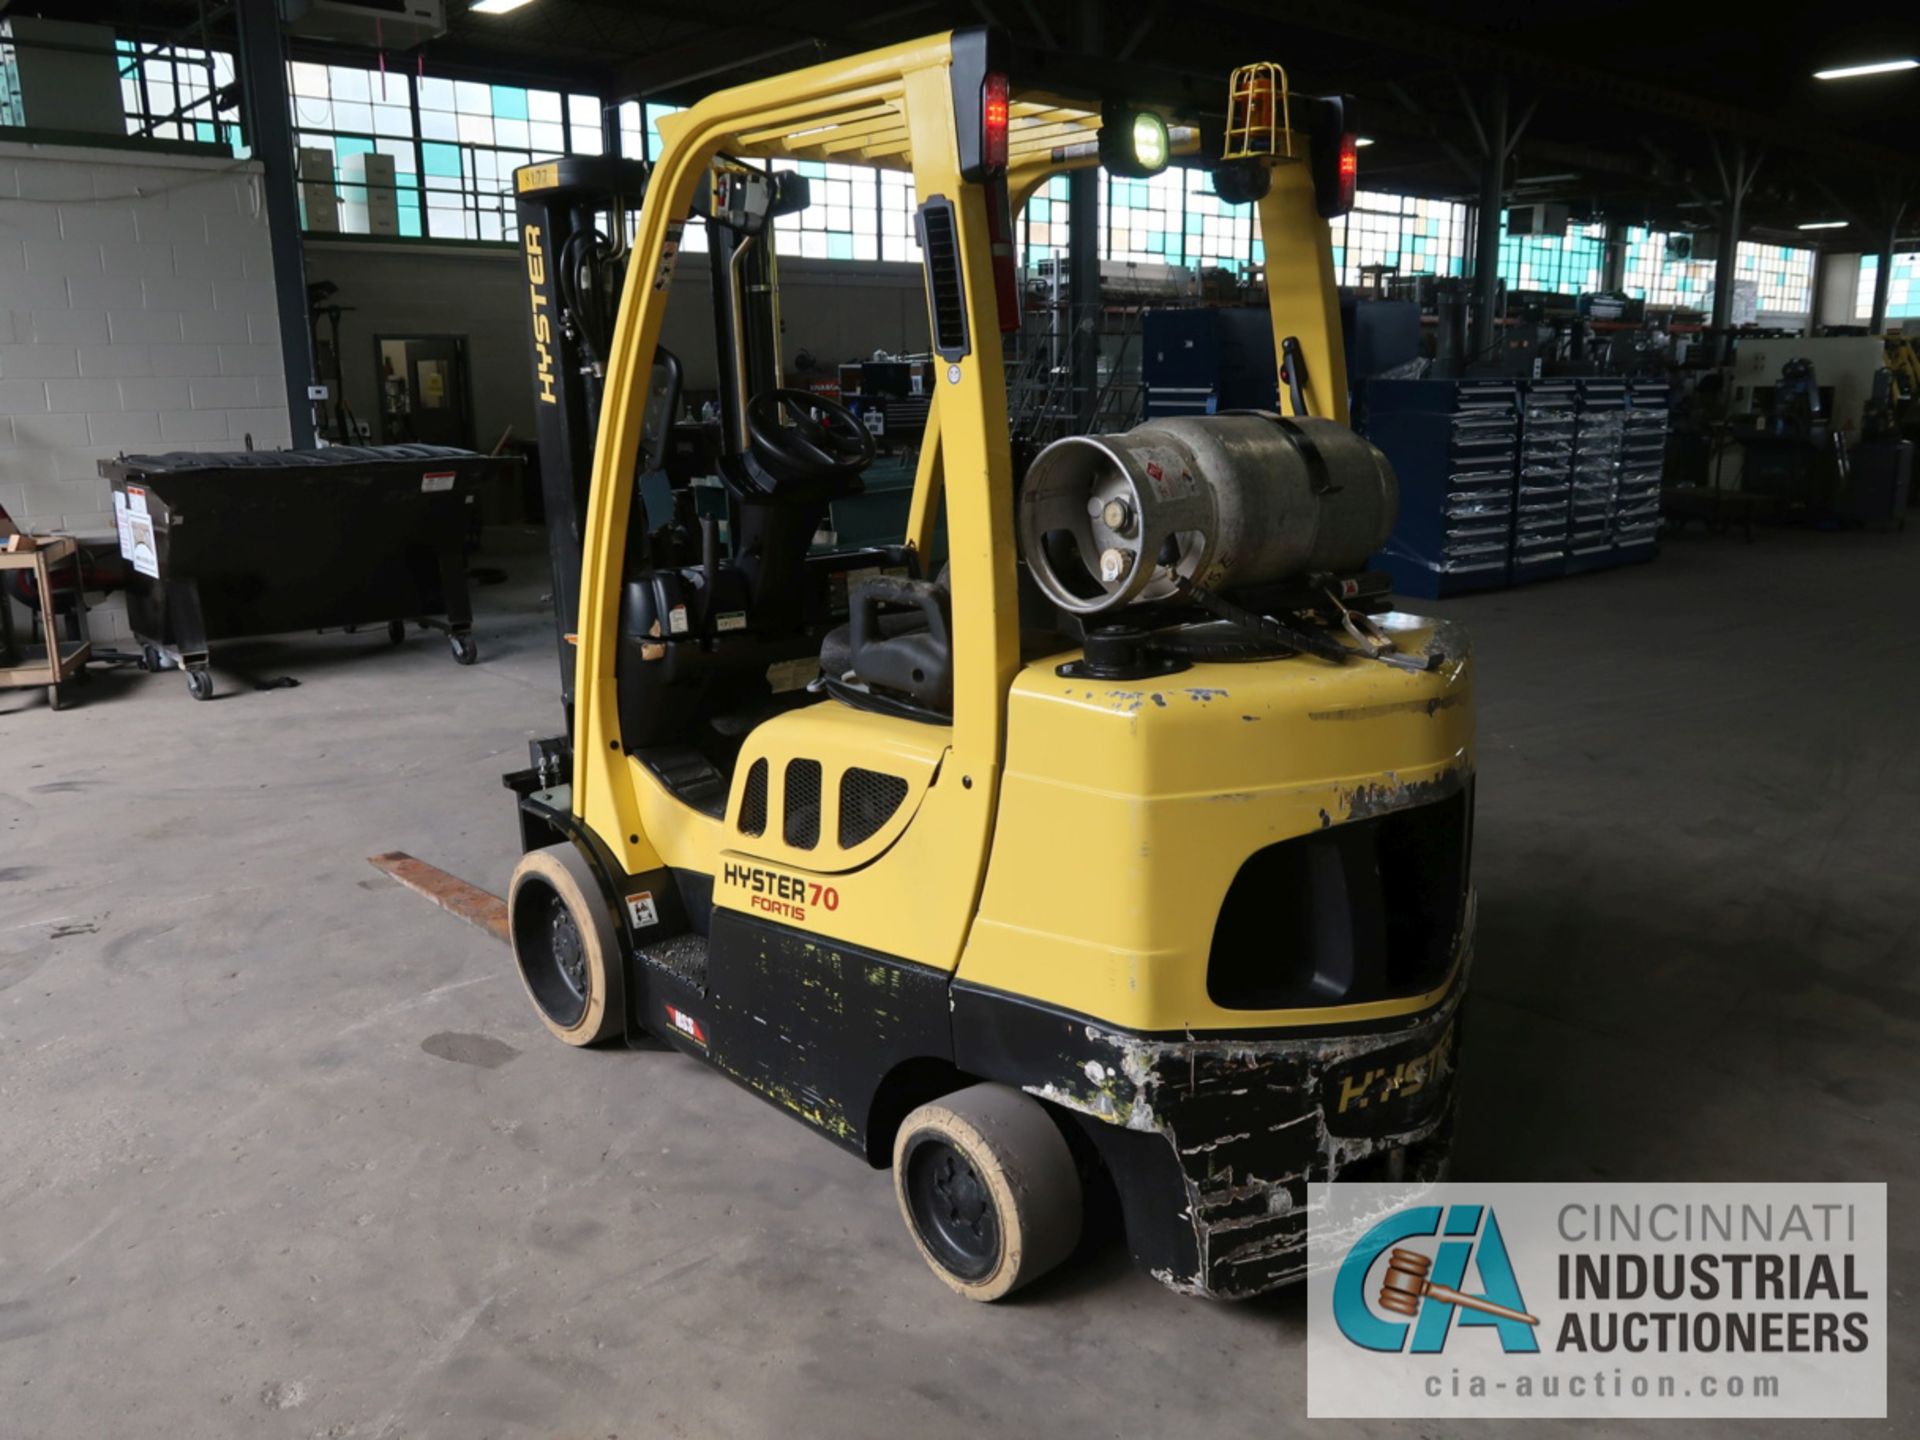 7,000 LB. HYSTER MODEL S70FT LP GAS SOLID TIRE LIFT TRUCK WITH 2-STAGE MAST, 122" LIFT HEIGHT, - Image 7 of 11